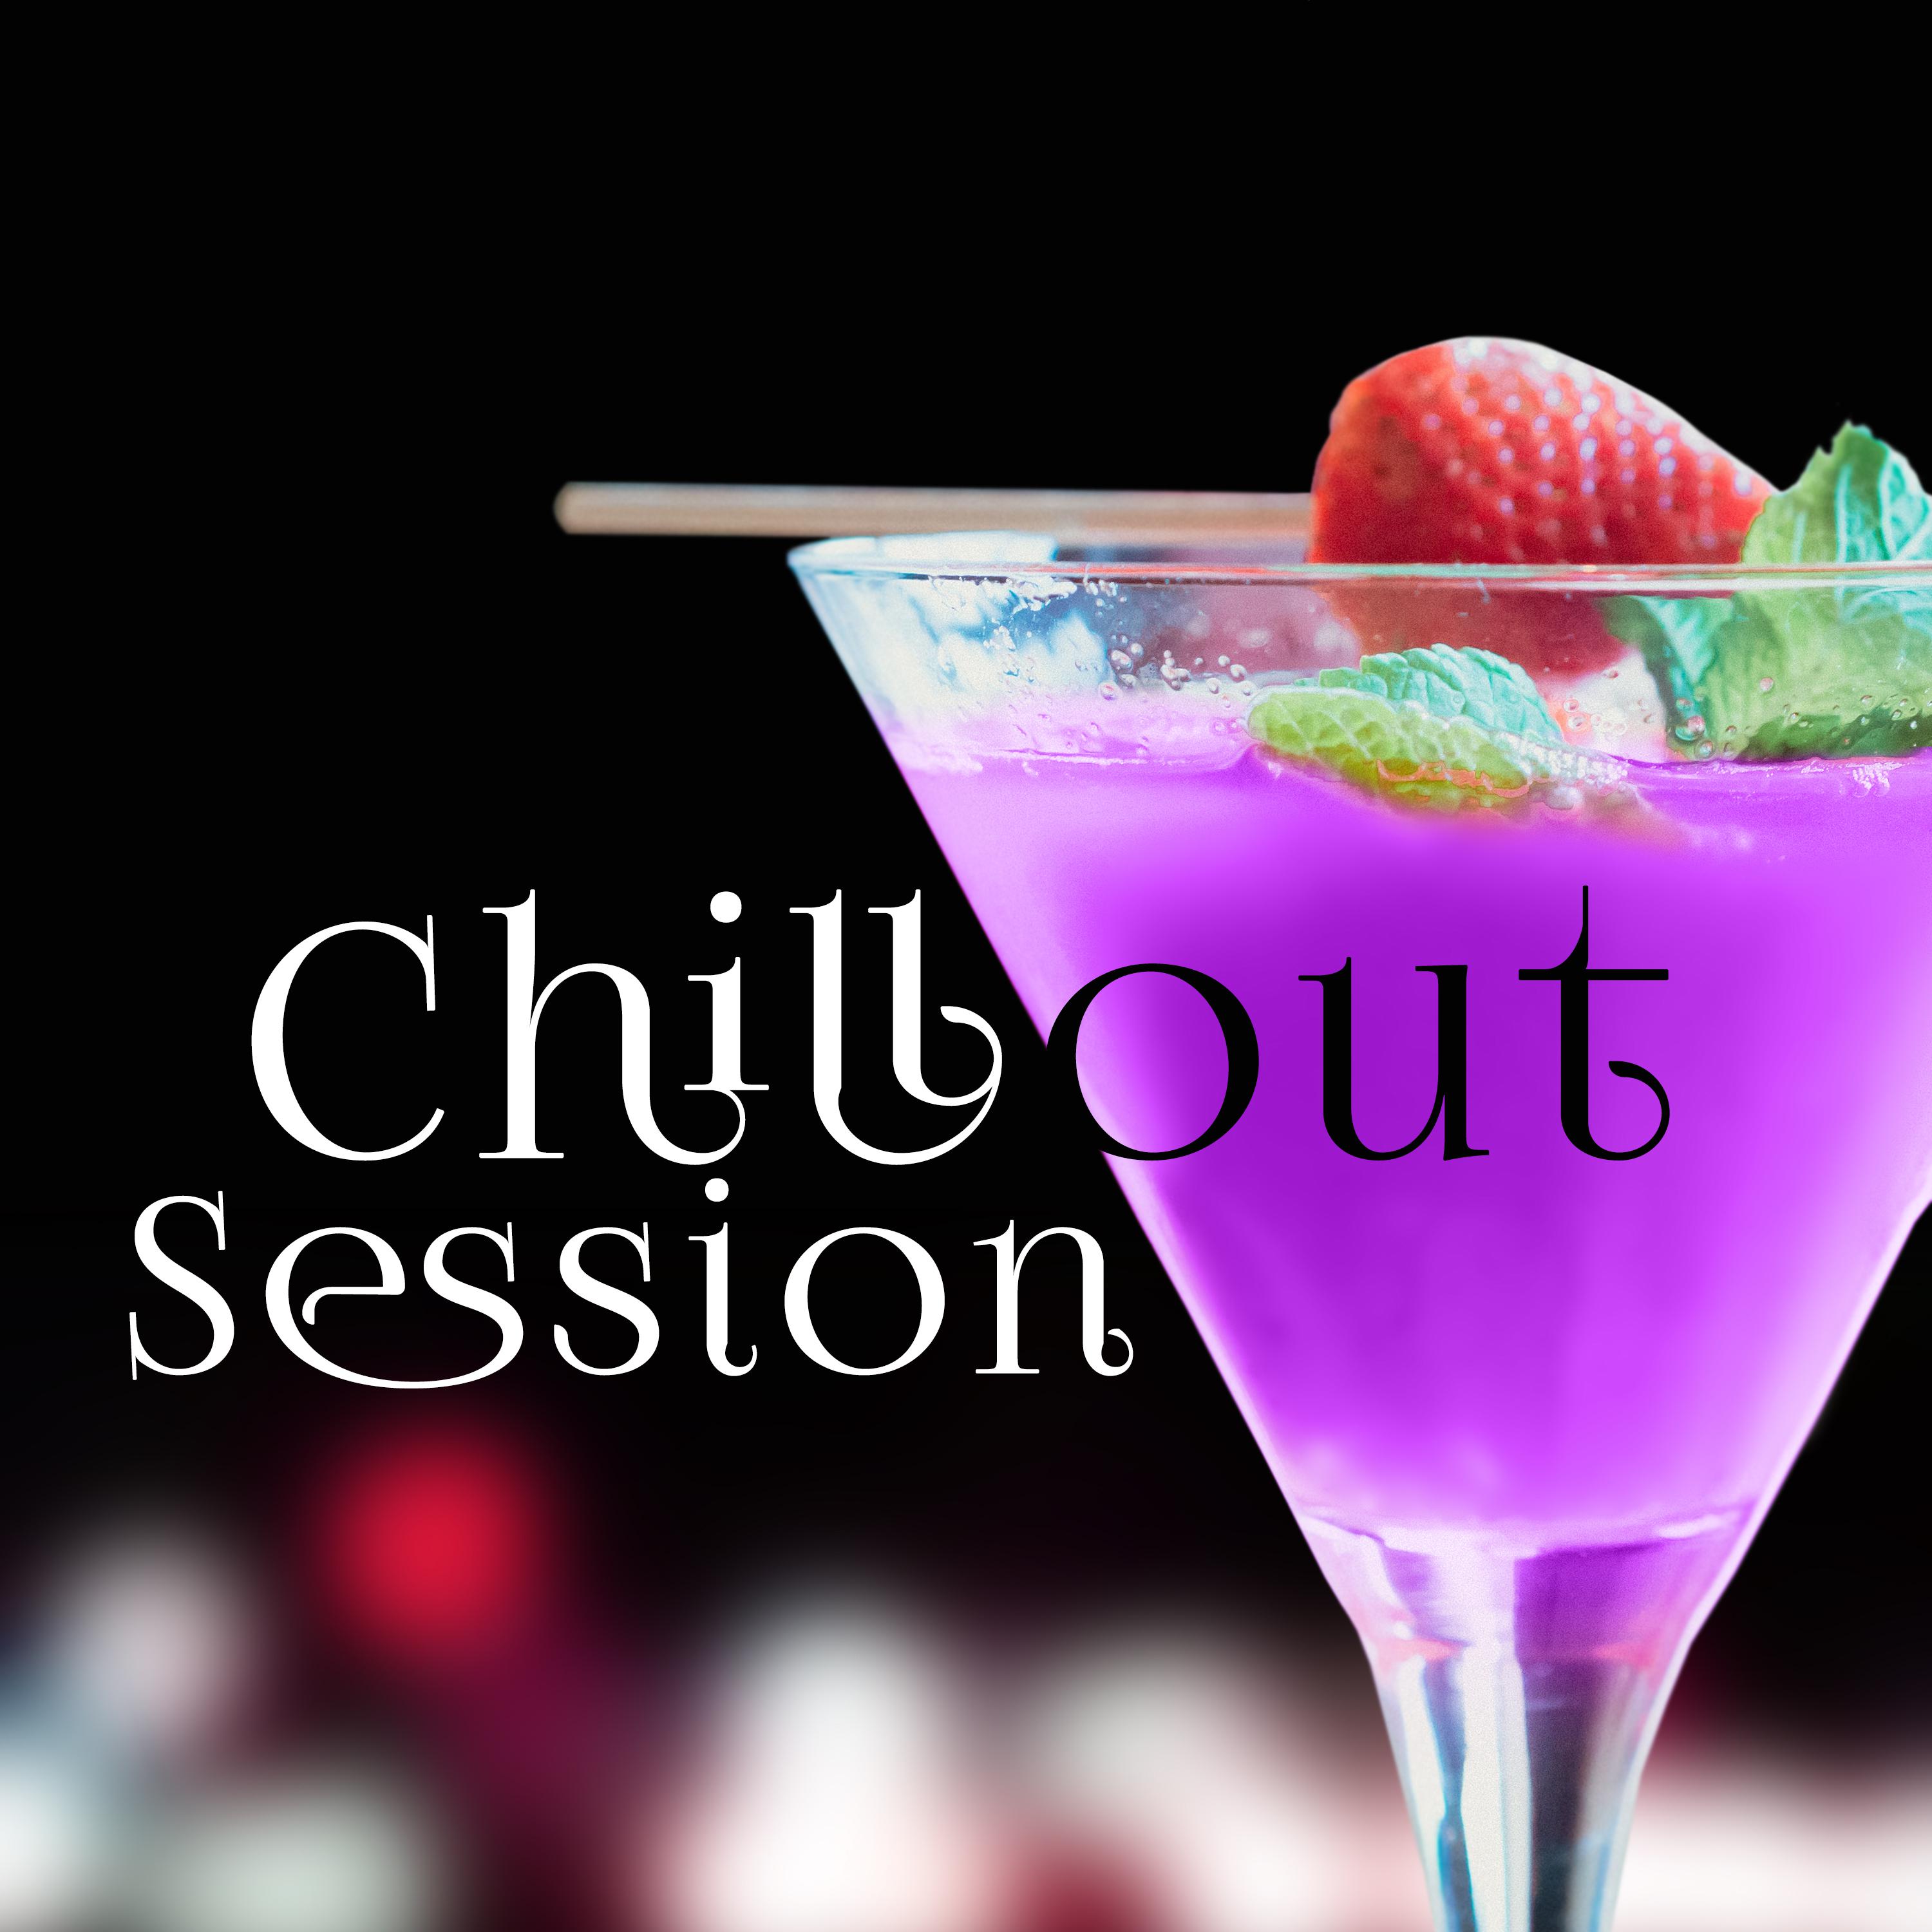 Chillout Session – Pure Relax, Chillout Music, Ibiza Lounge, Hotel Lounge, Chill Out 2016